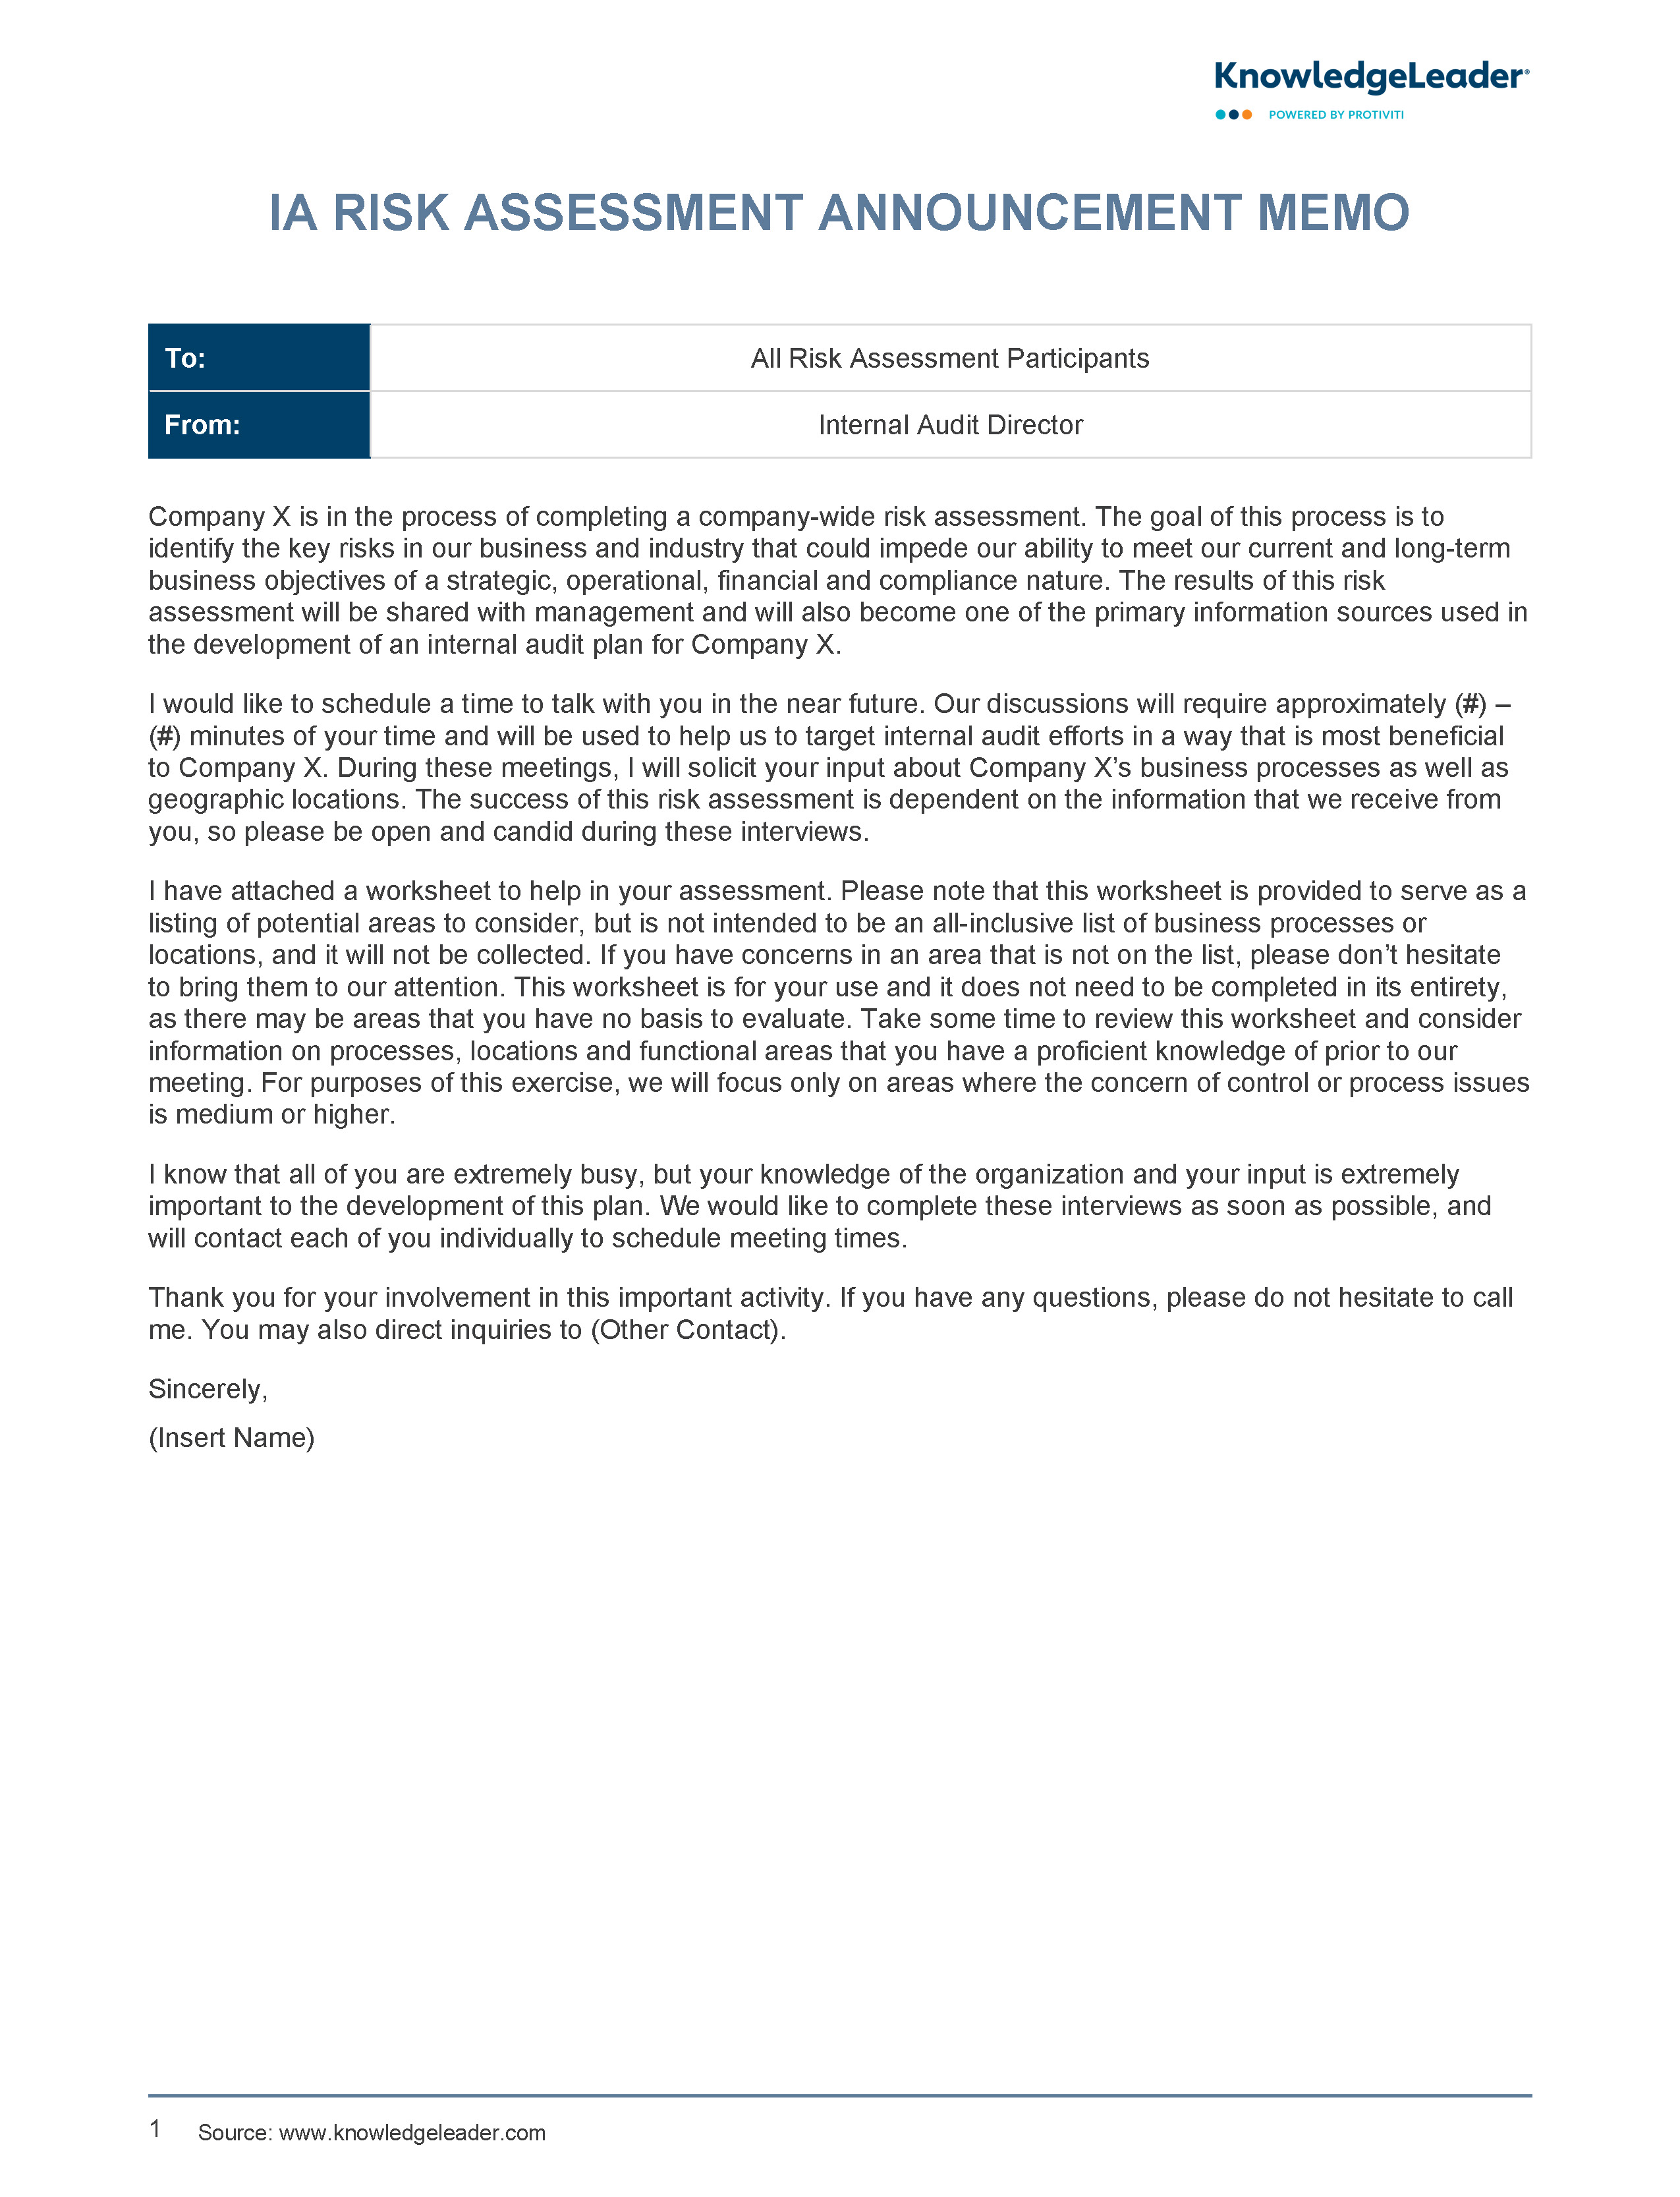 Screenshot of the first page of IA Risk Assessment Announcement Memo